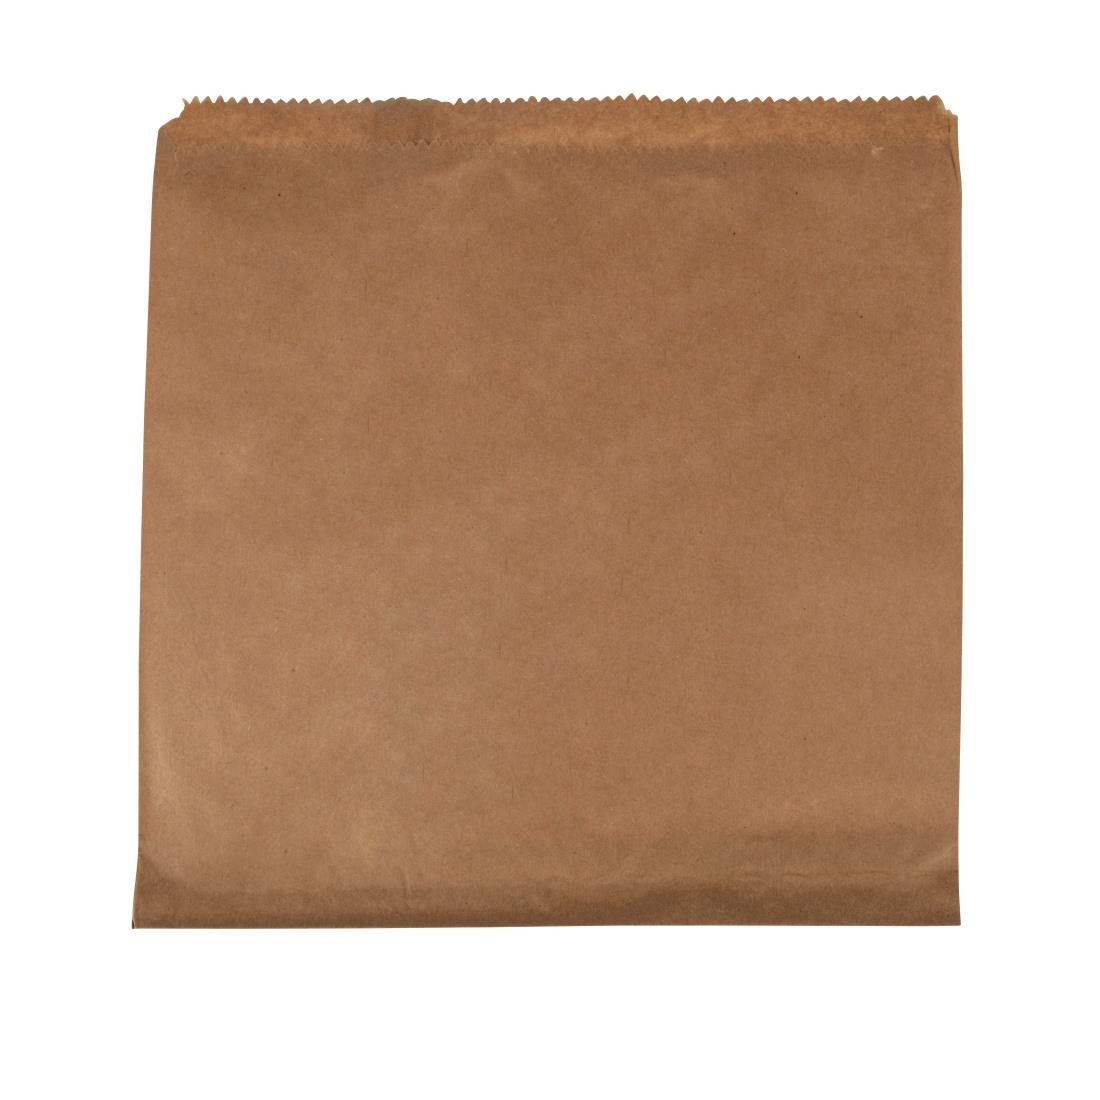 Fiesta Brown Paper Counter Bags Large (Pack of 1000)